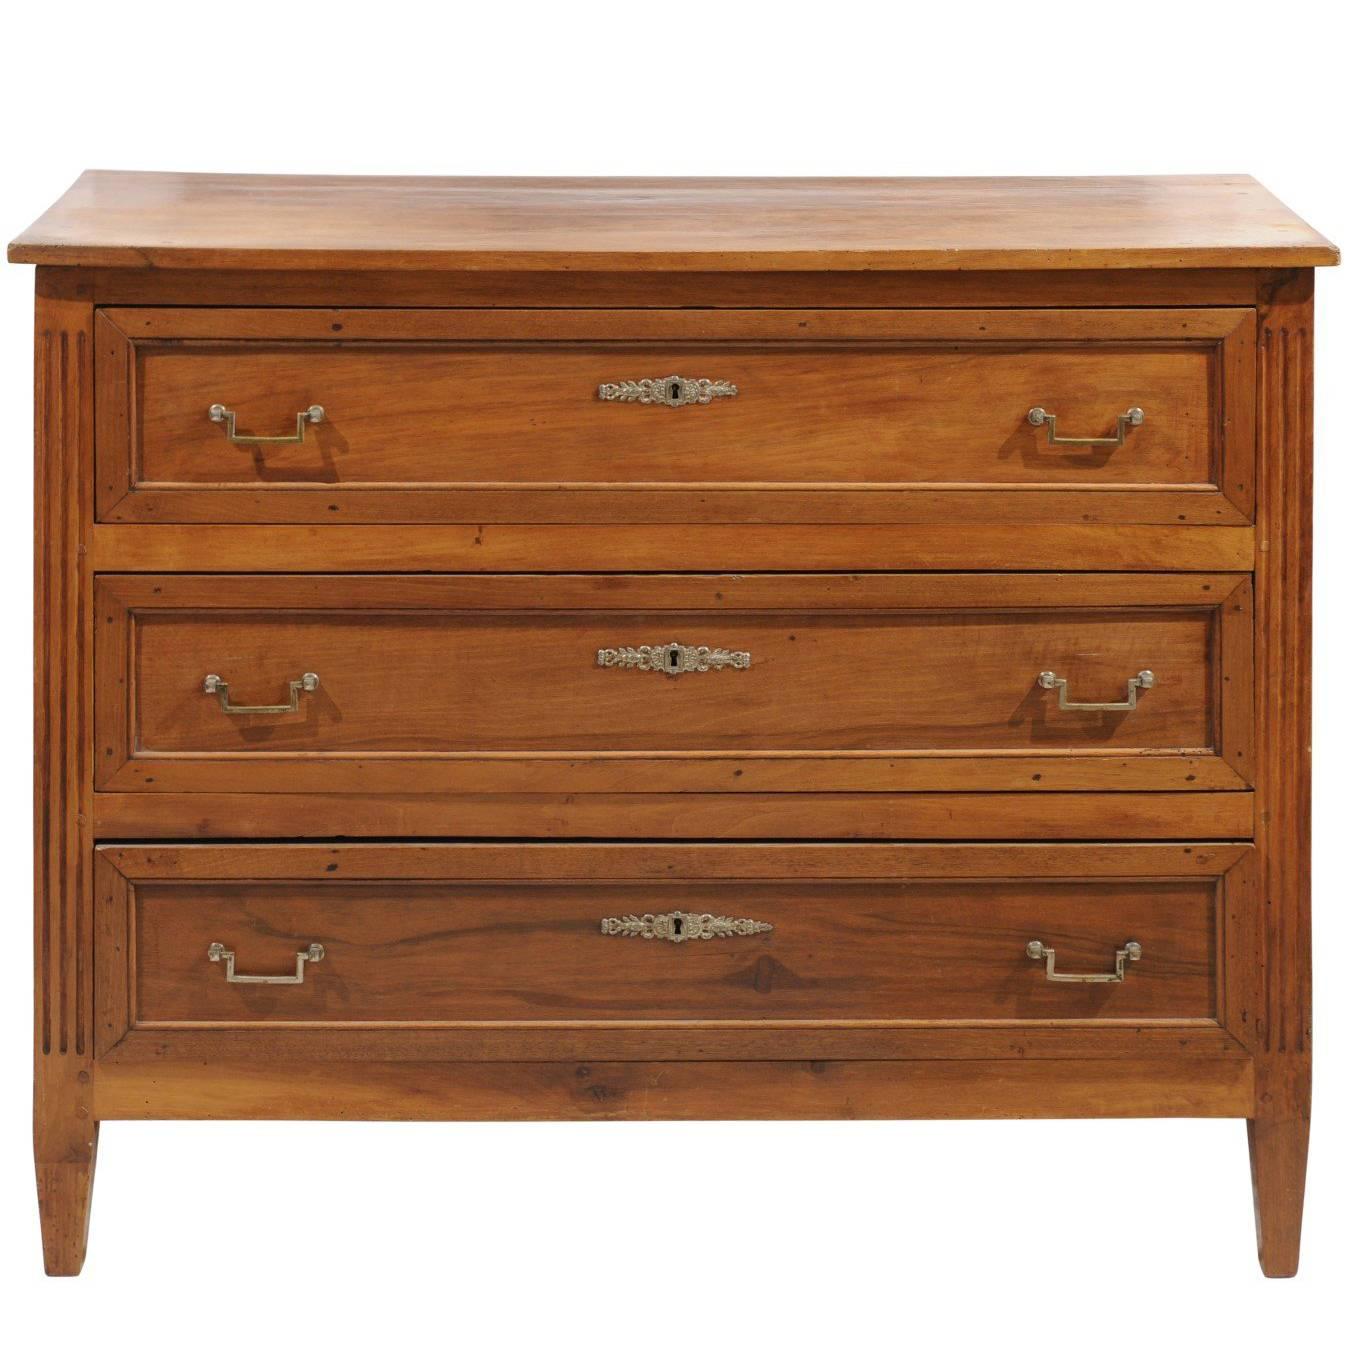 Louis XVI Style French Walnut Three-Drawer Commode from the Late 19th Century